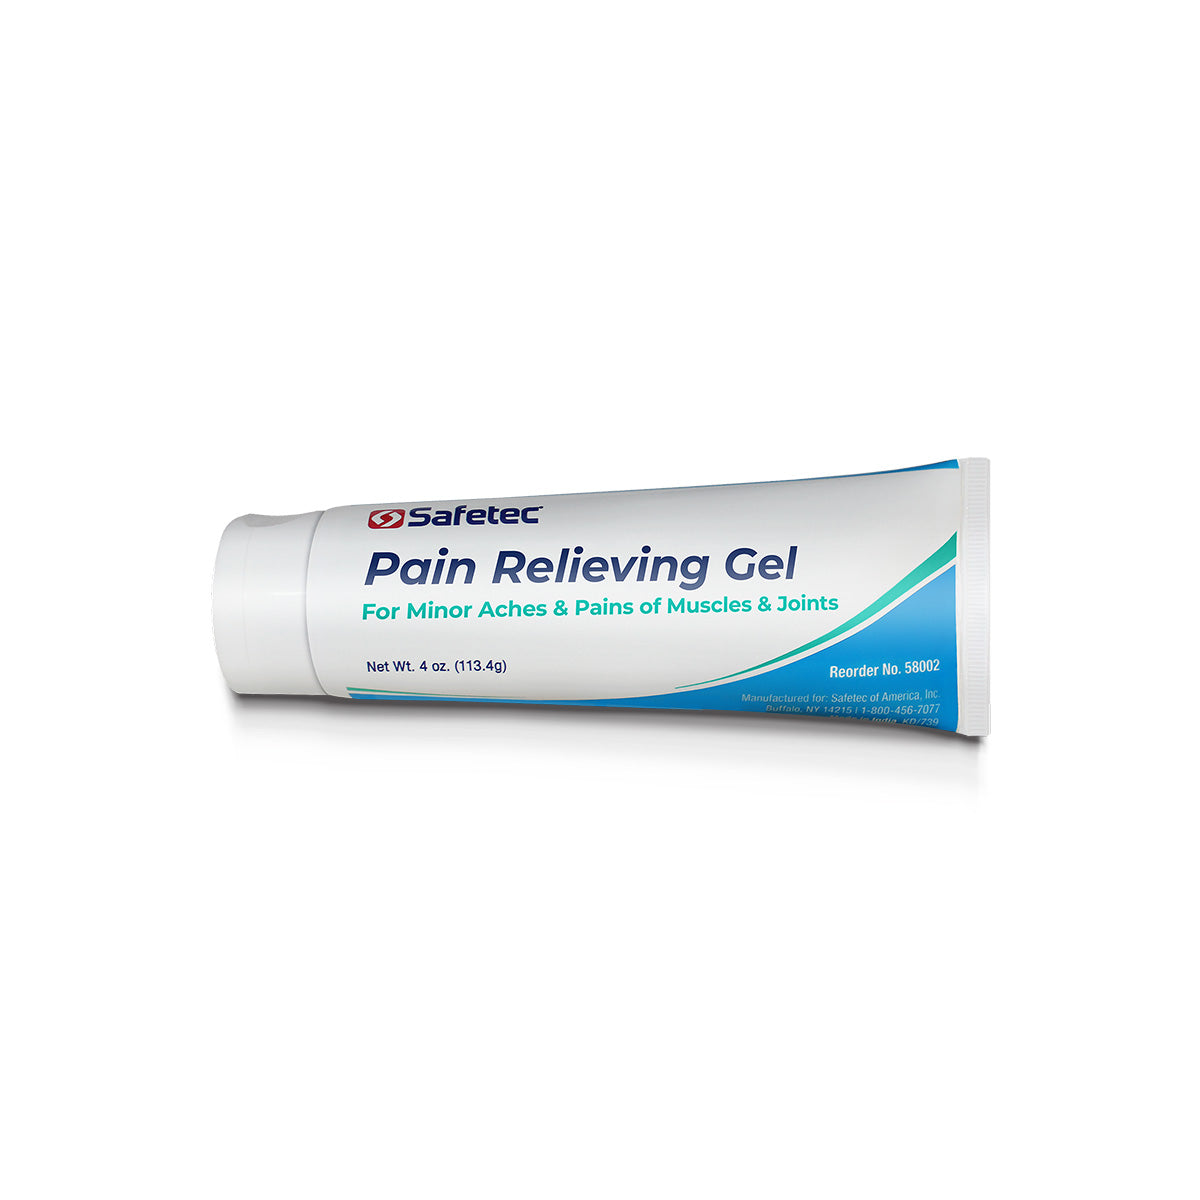 Pain Relieving Gel – 4 oz. Tube